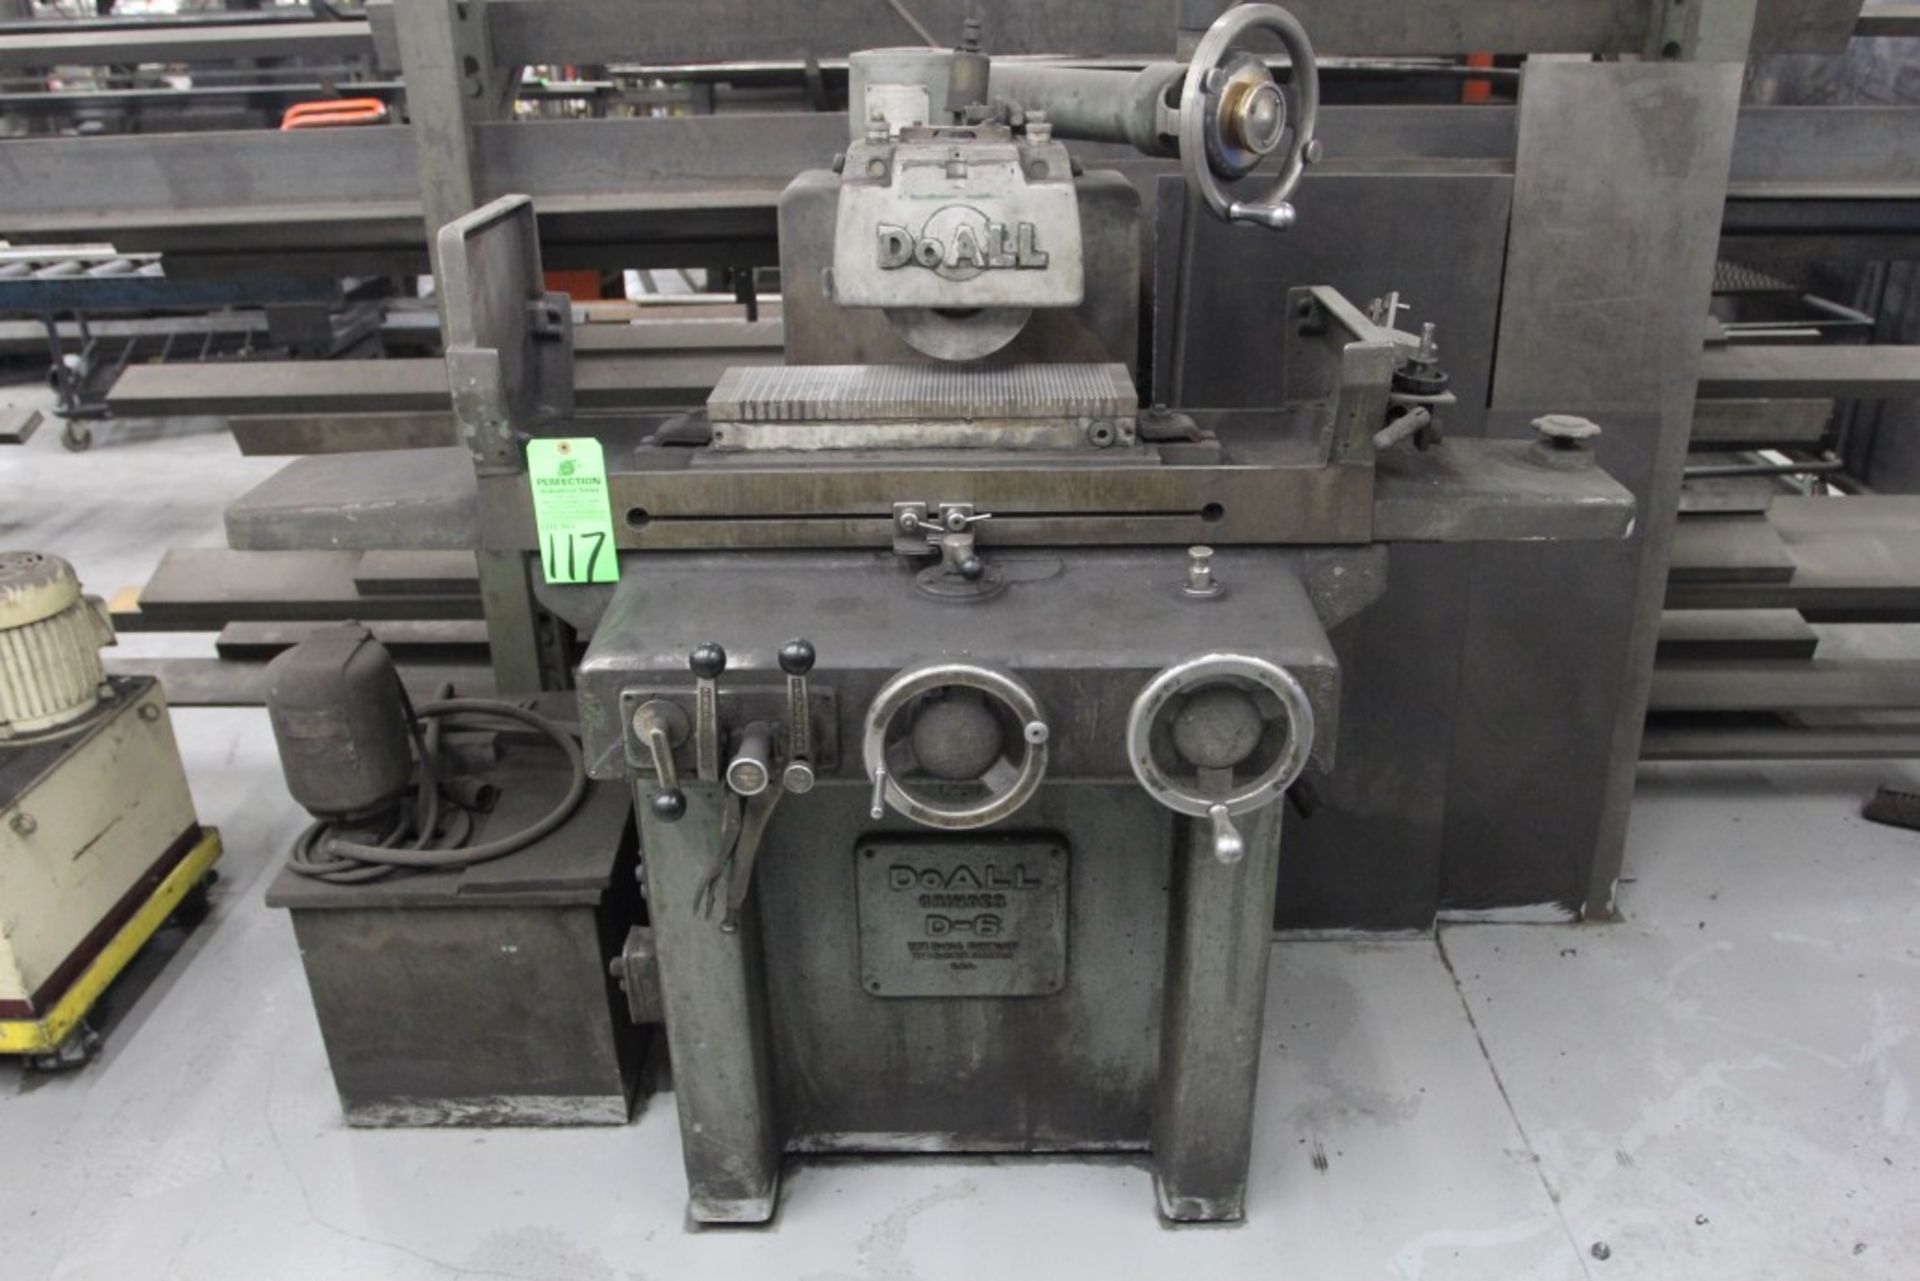 DoAll no 6 Surface Grinder, S/N. 3-53383